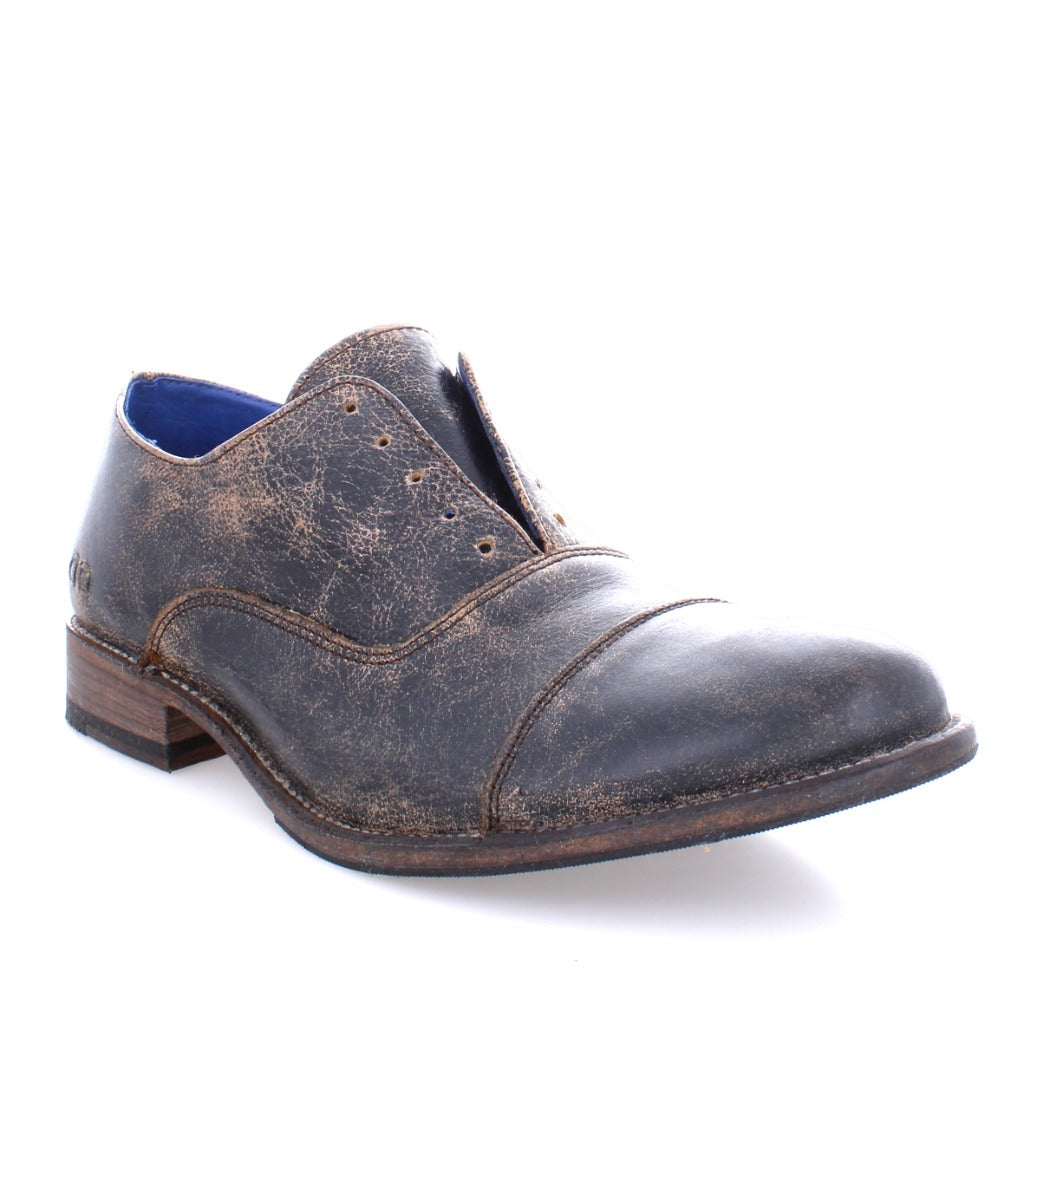 A men's brown oxford shoe with blue soles called the Thorn by Bed Stu.